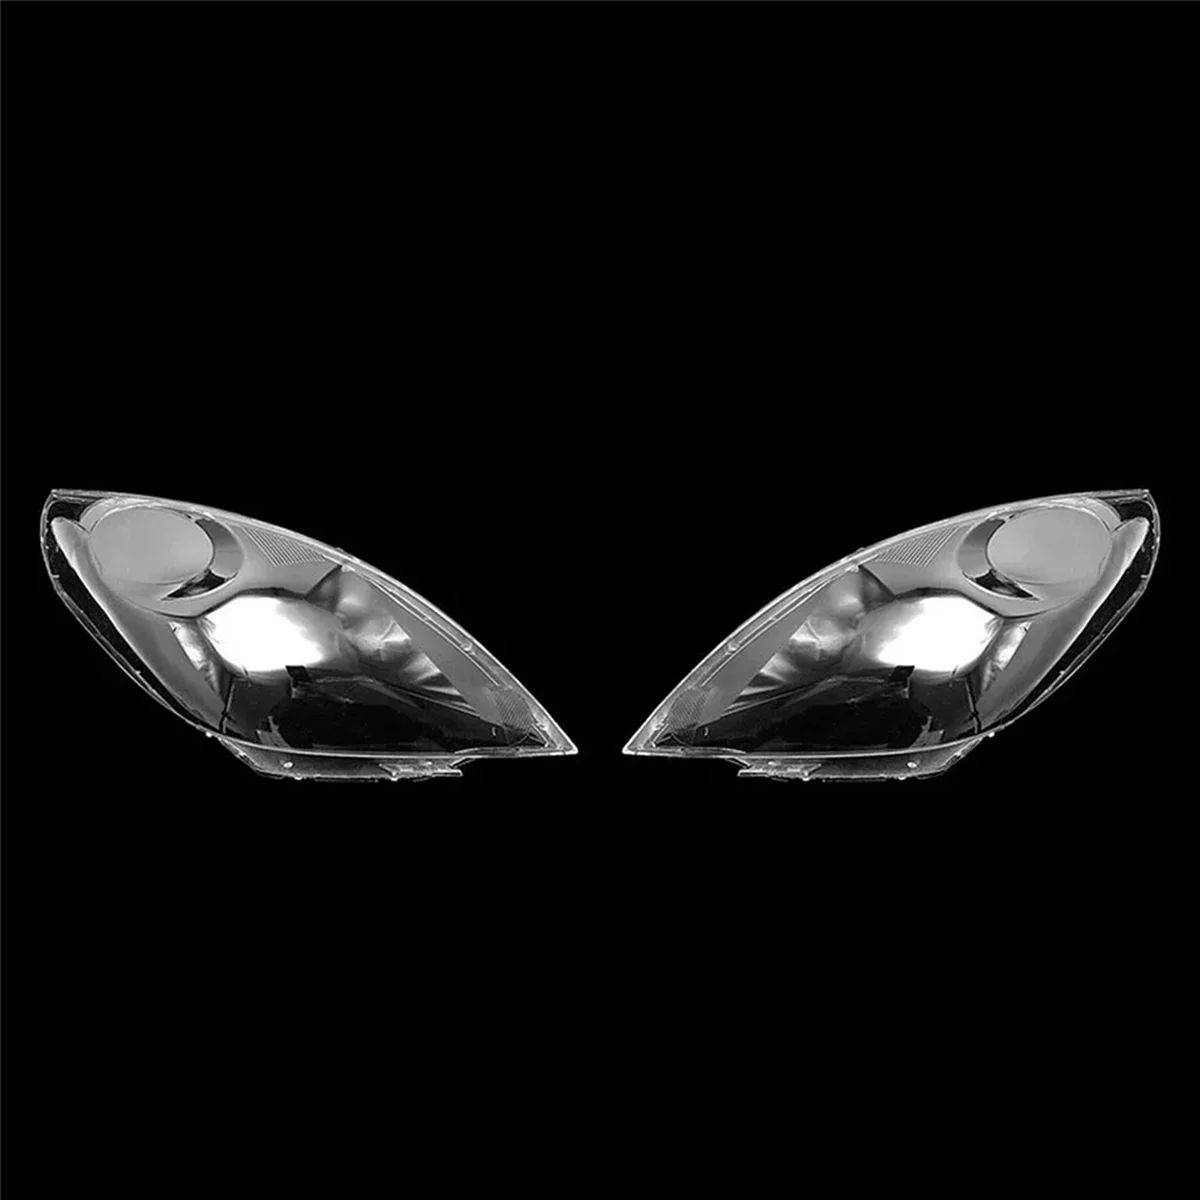 

Auto Right Head Light Lamp Case Headlight Cover Lens for Chevrolet Spark 2011-2014 Transparent Lampshade